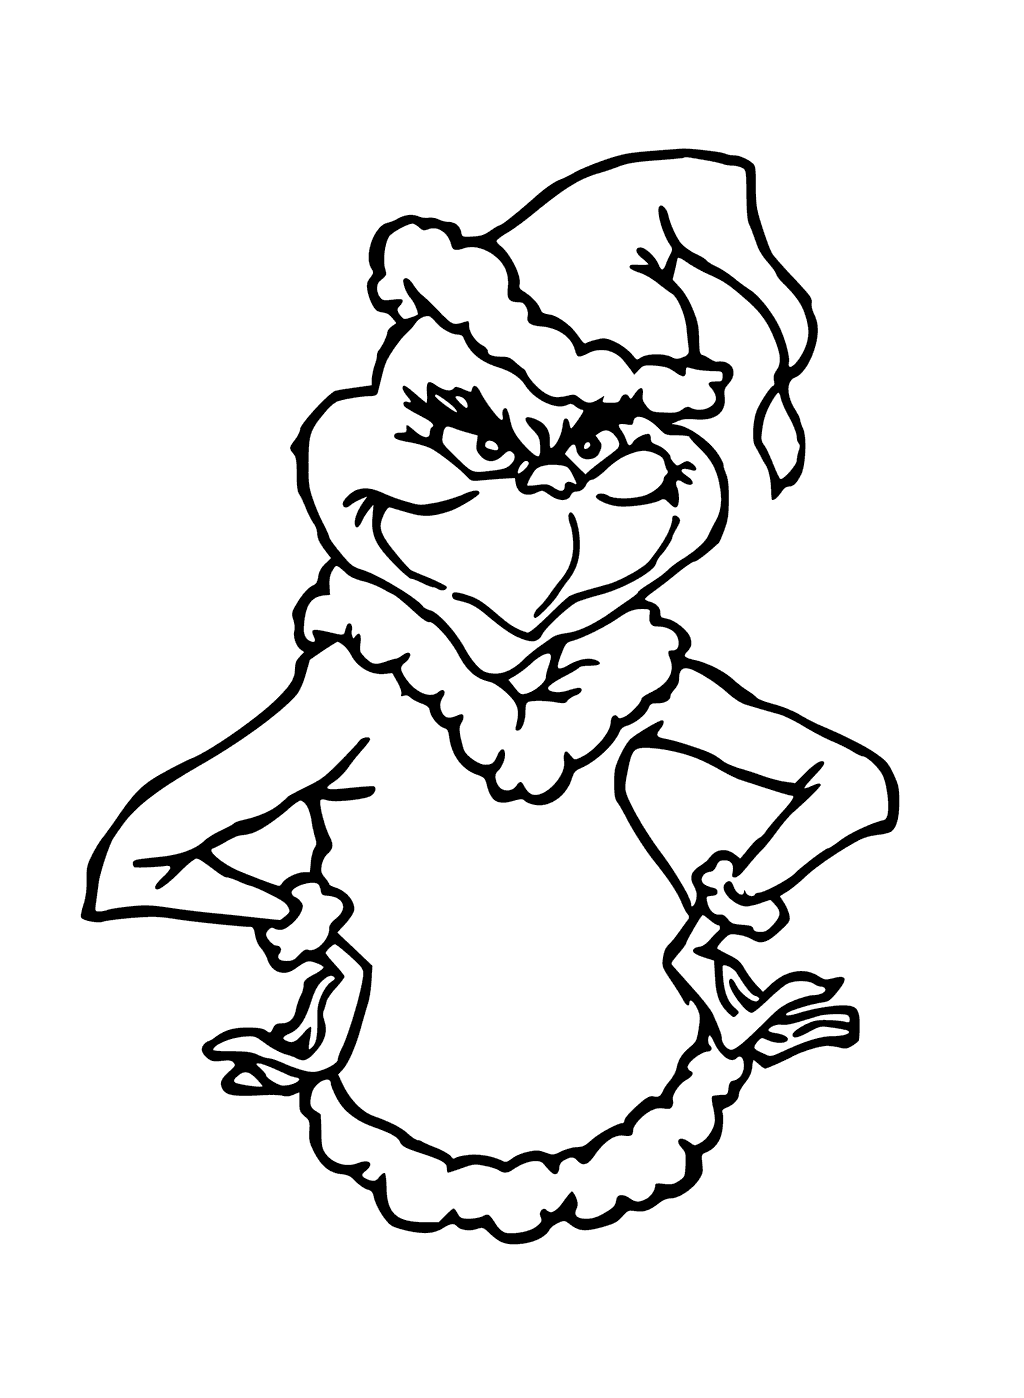 New Grinch Movie Coloring Pages - How The Grinch Stole Christmas